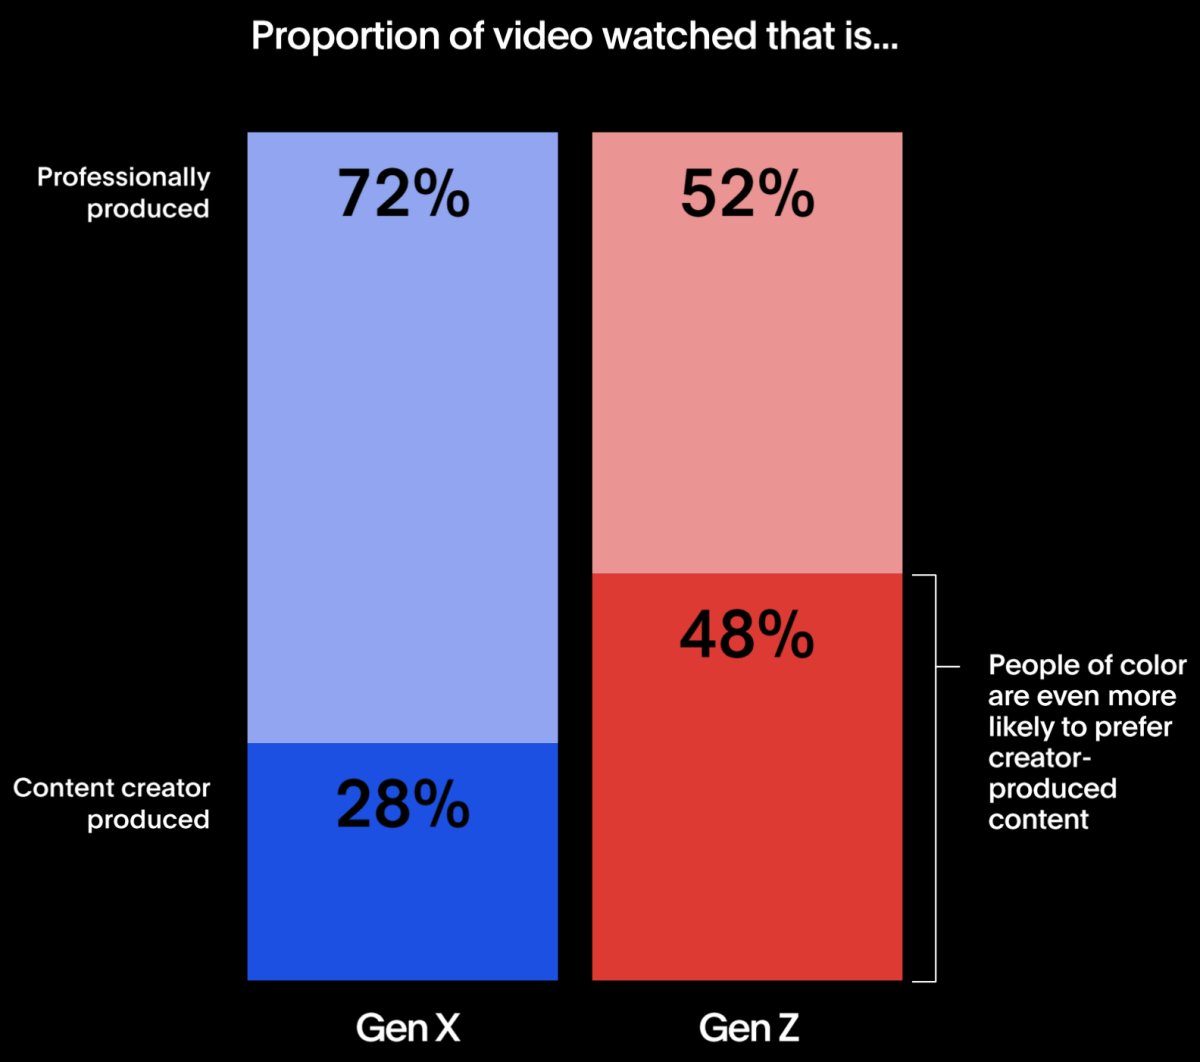 bar graph titled "proportion of video watched that is..."